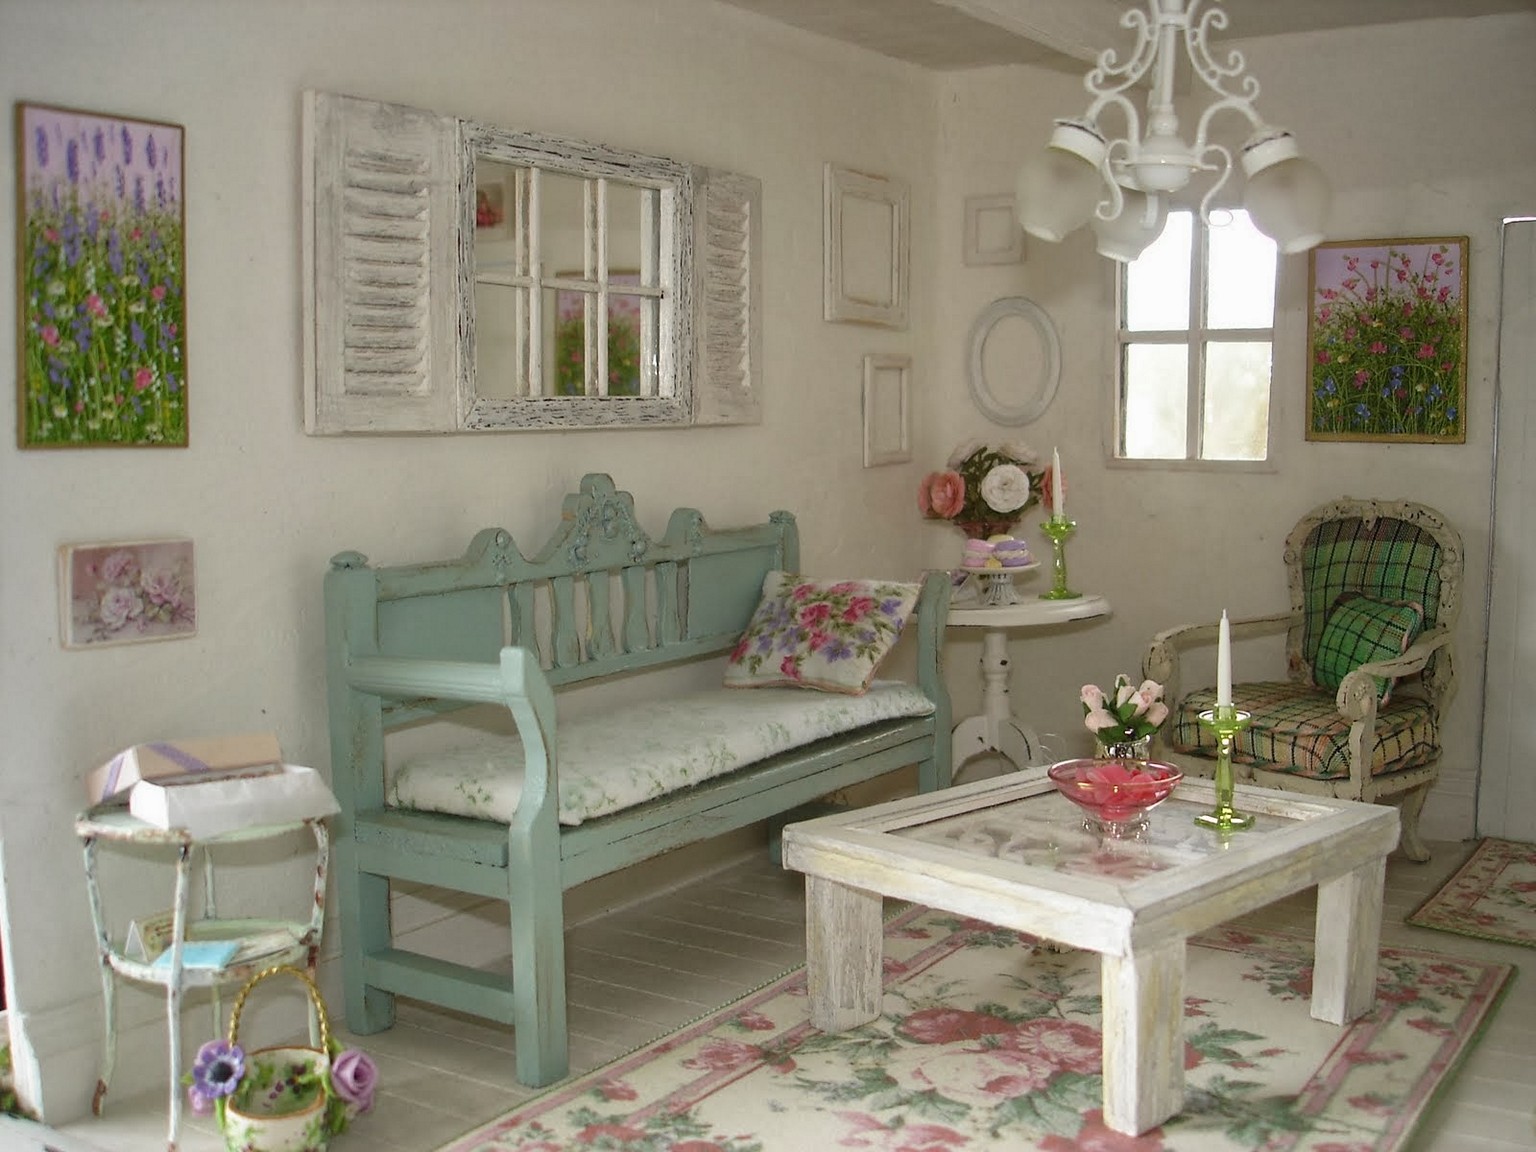 Porch-inspired shabby chic living room.  Source: backtobasicliving.com